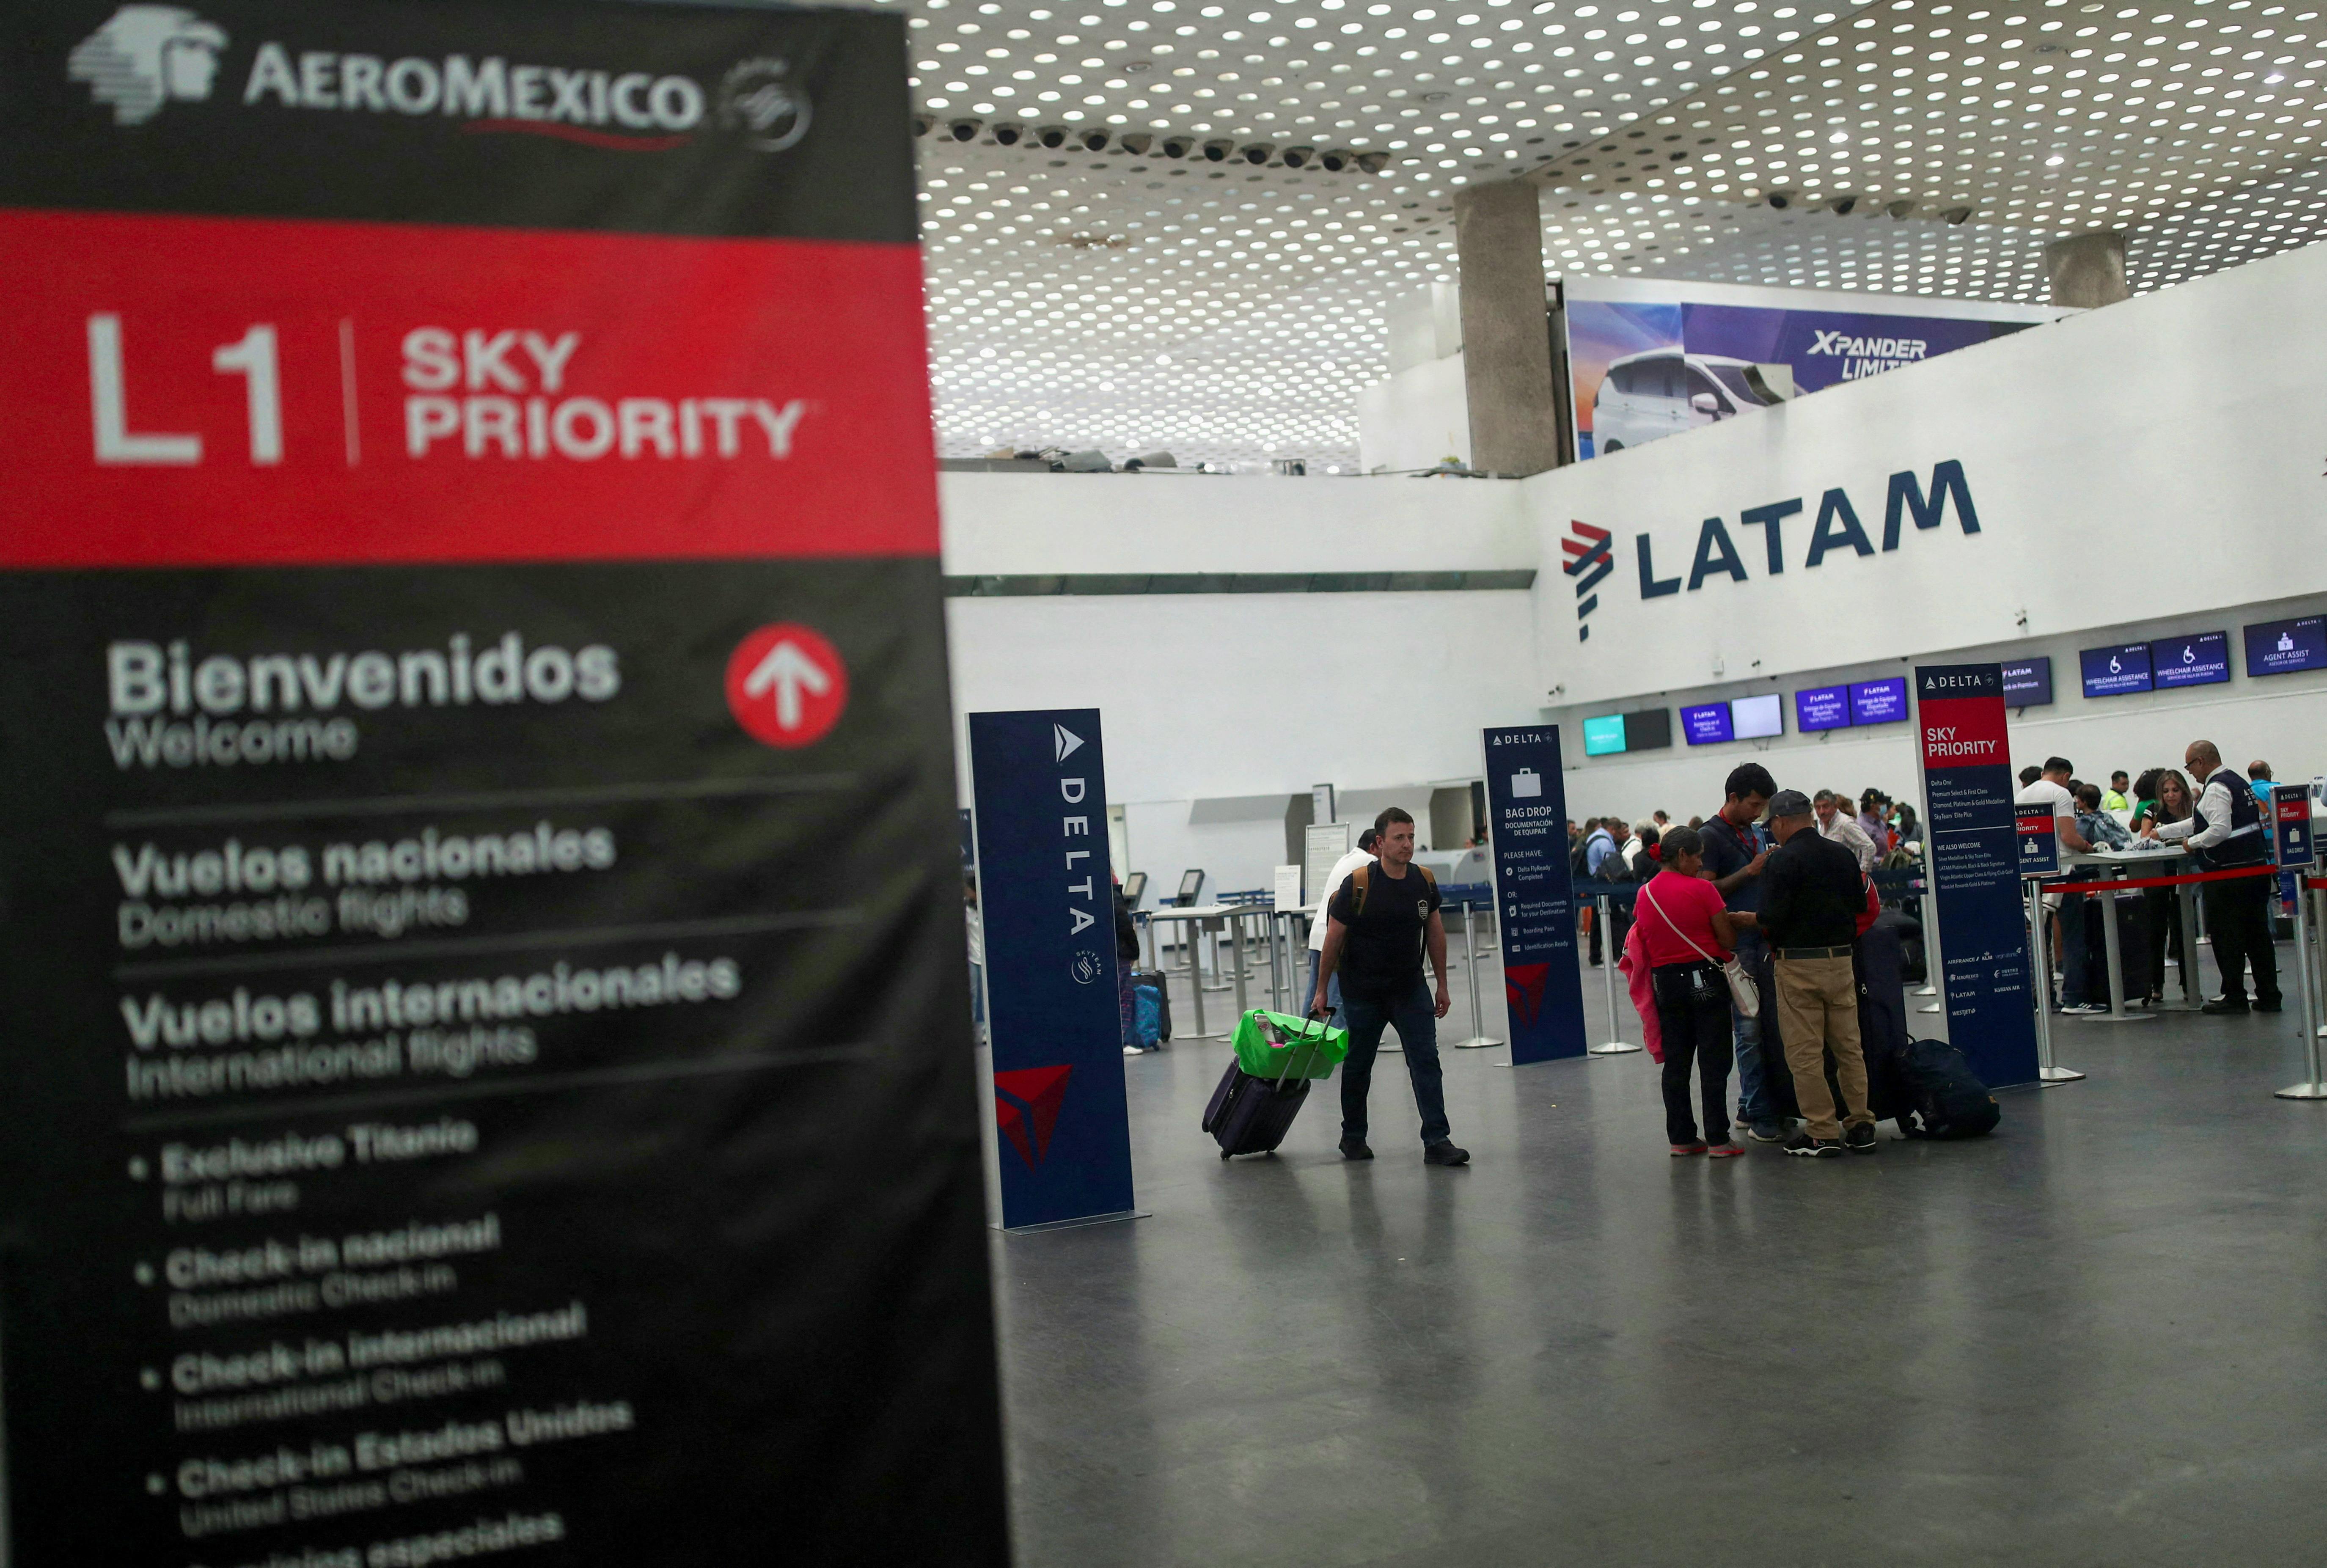 LATAM Airlines Soars to the Top on Brazil-U.S. Routes